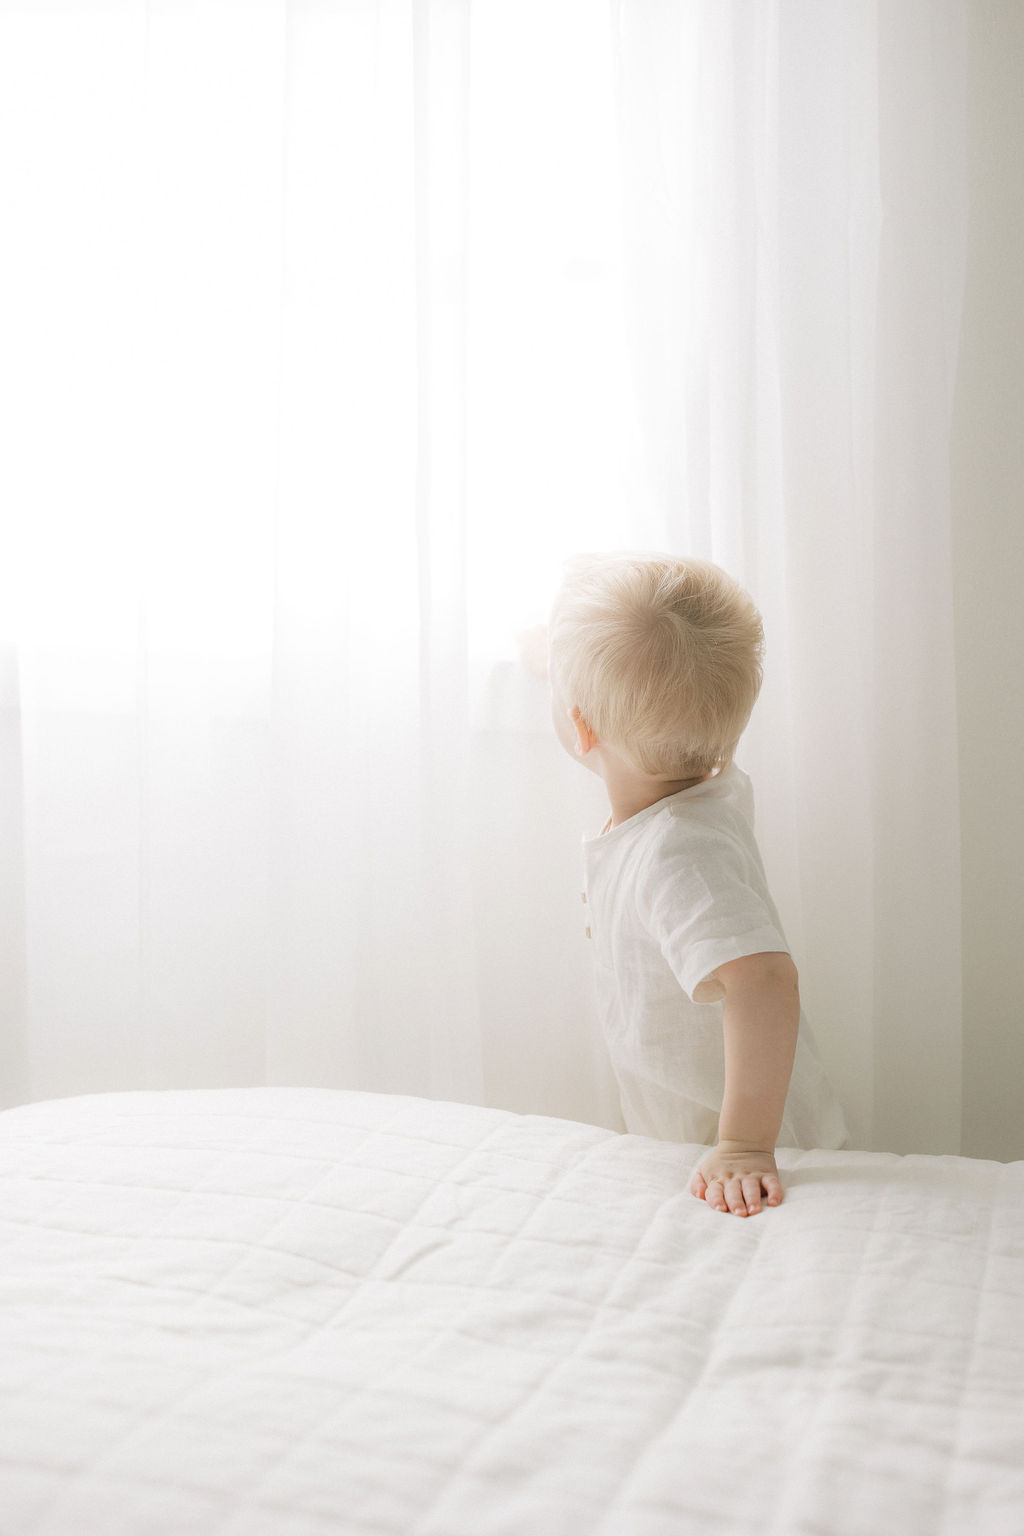 A toddler boy explores a window above a bed in a studio while wearing a white onesie